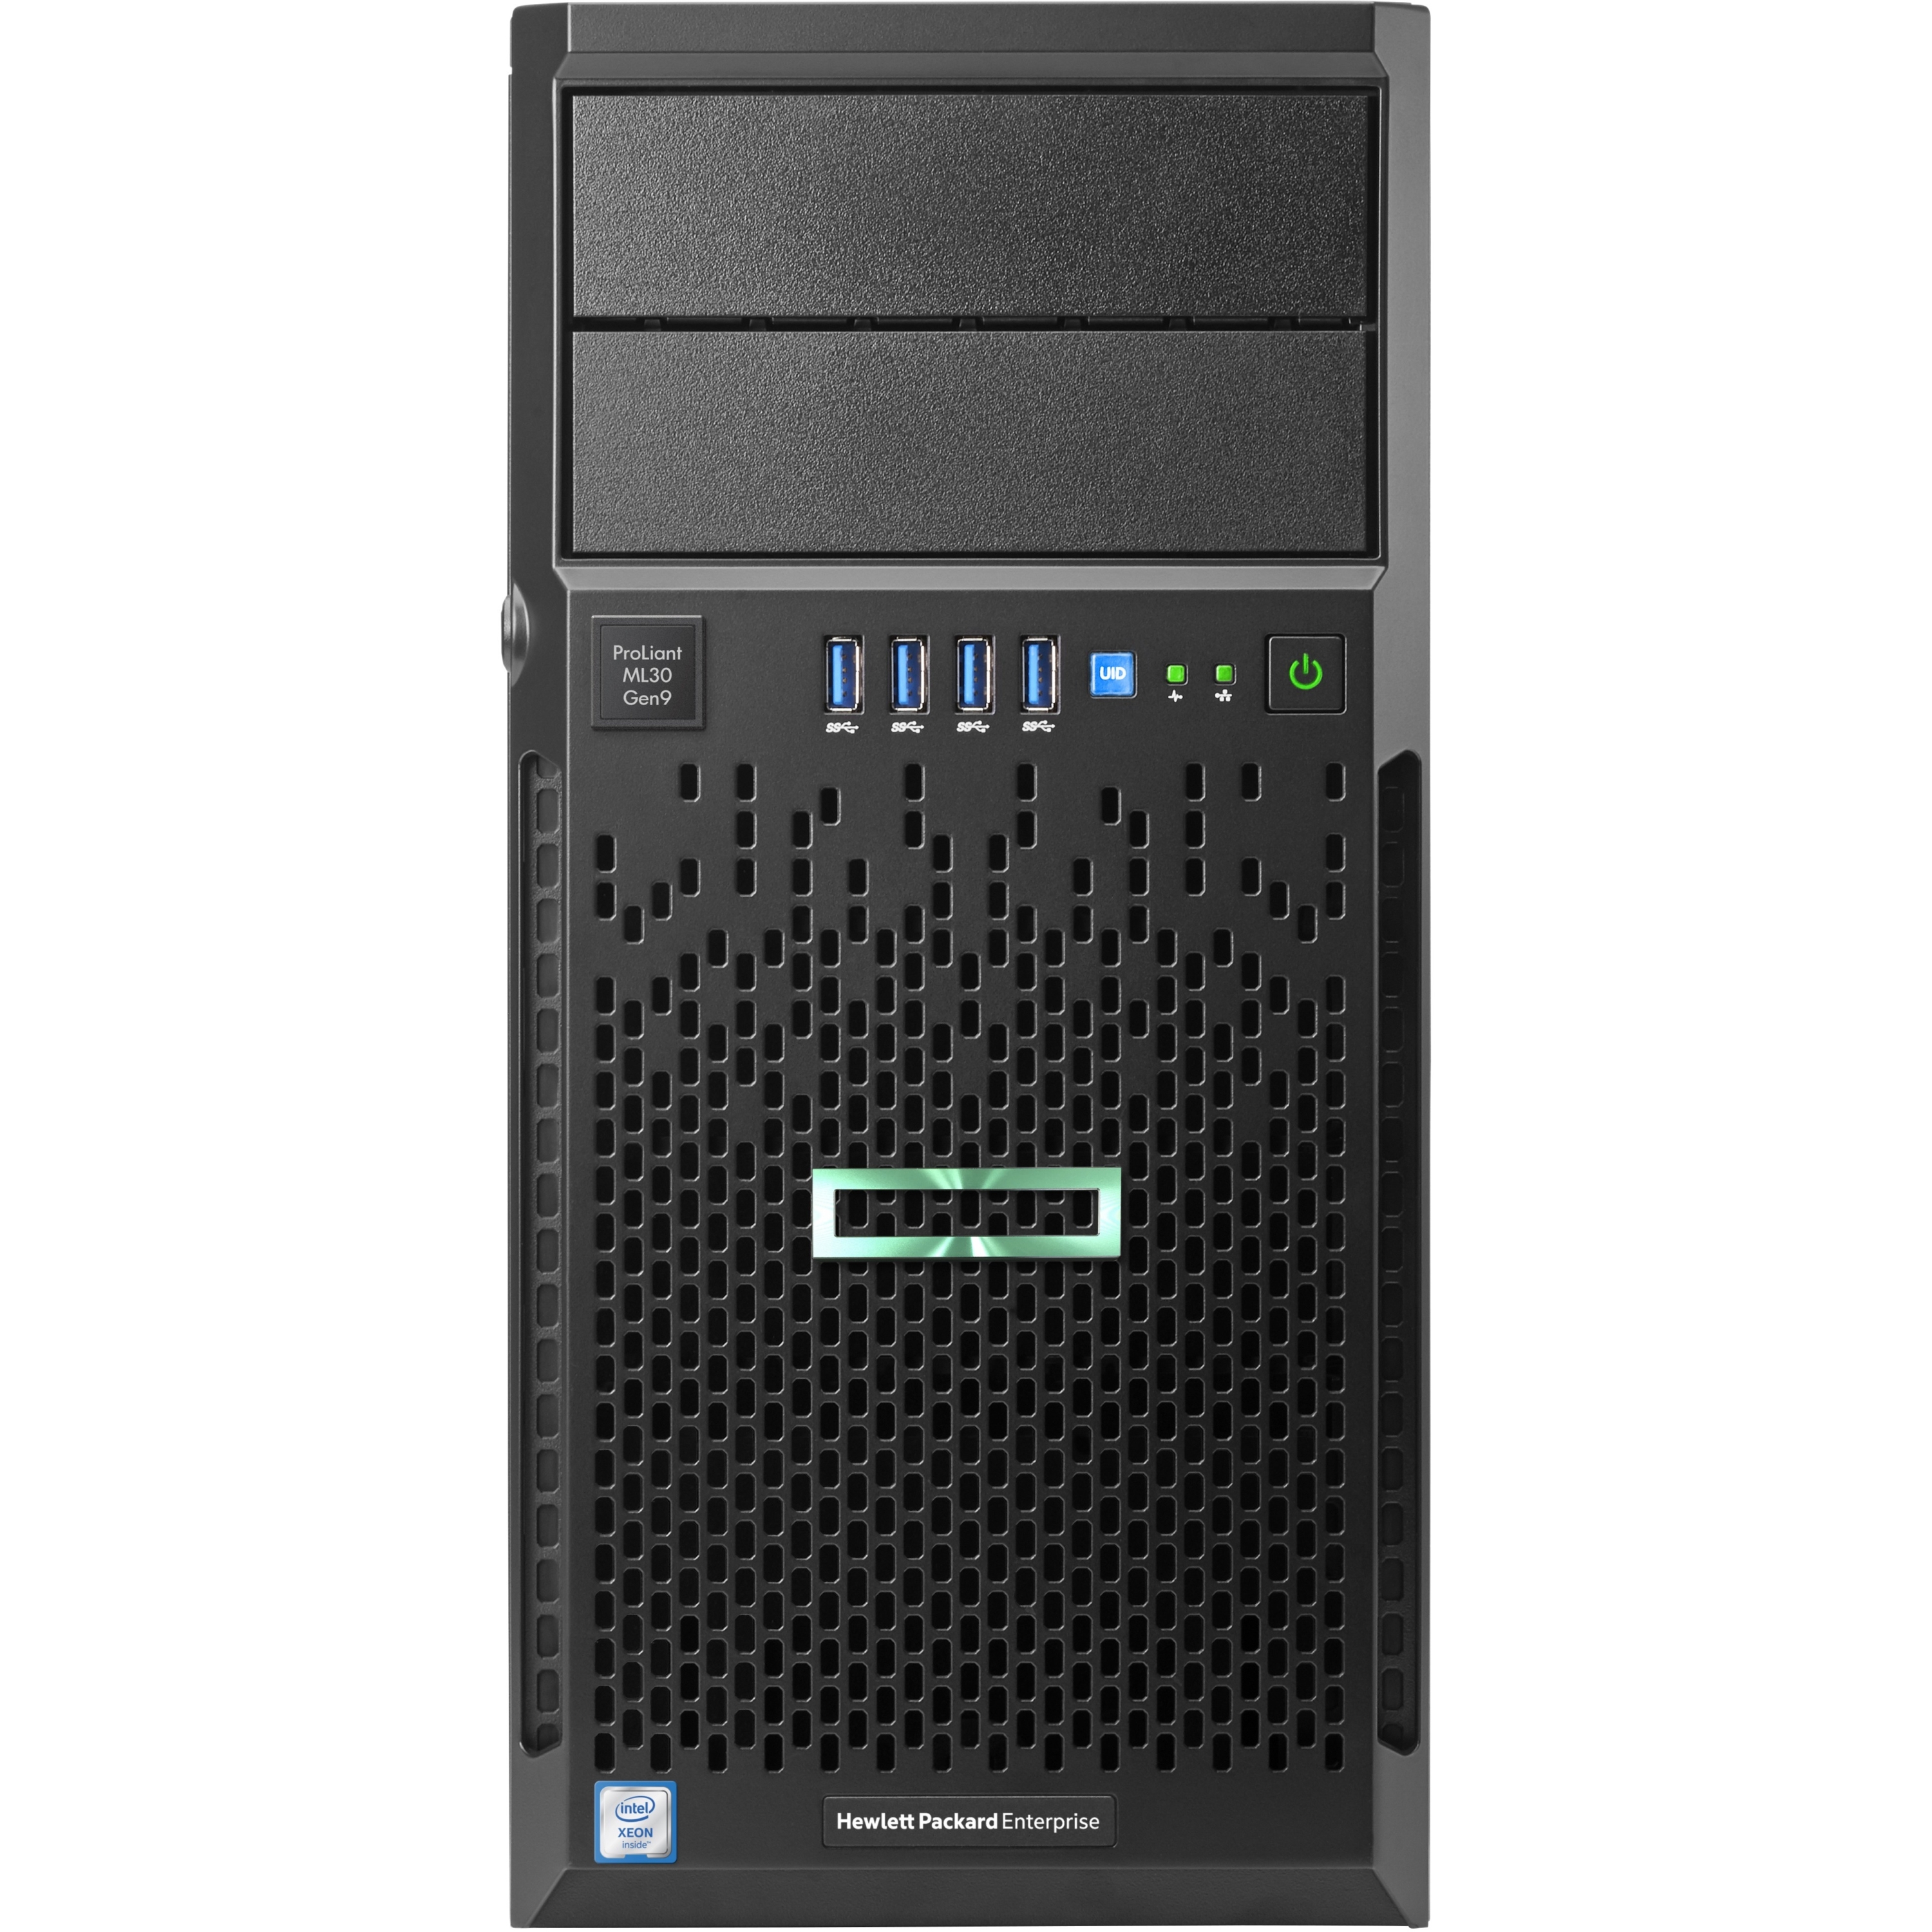 weigeren roterend kunstmest Computers :: Computers & Servers :: Servers :: HPE HP ProLiant ML30 G9 4U  Tower Server - 1 x Intel Xeon E3-1240 v6 Quad-core (4 Core) 3.70 GHz - 8 GB  Installed